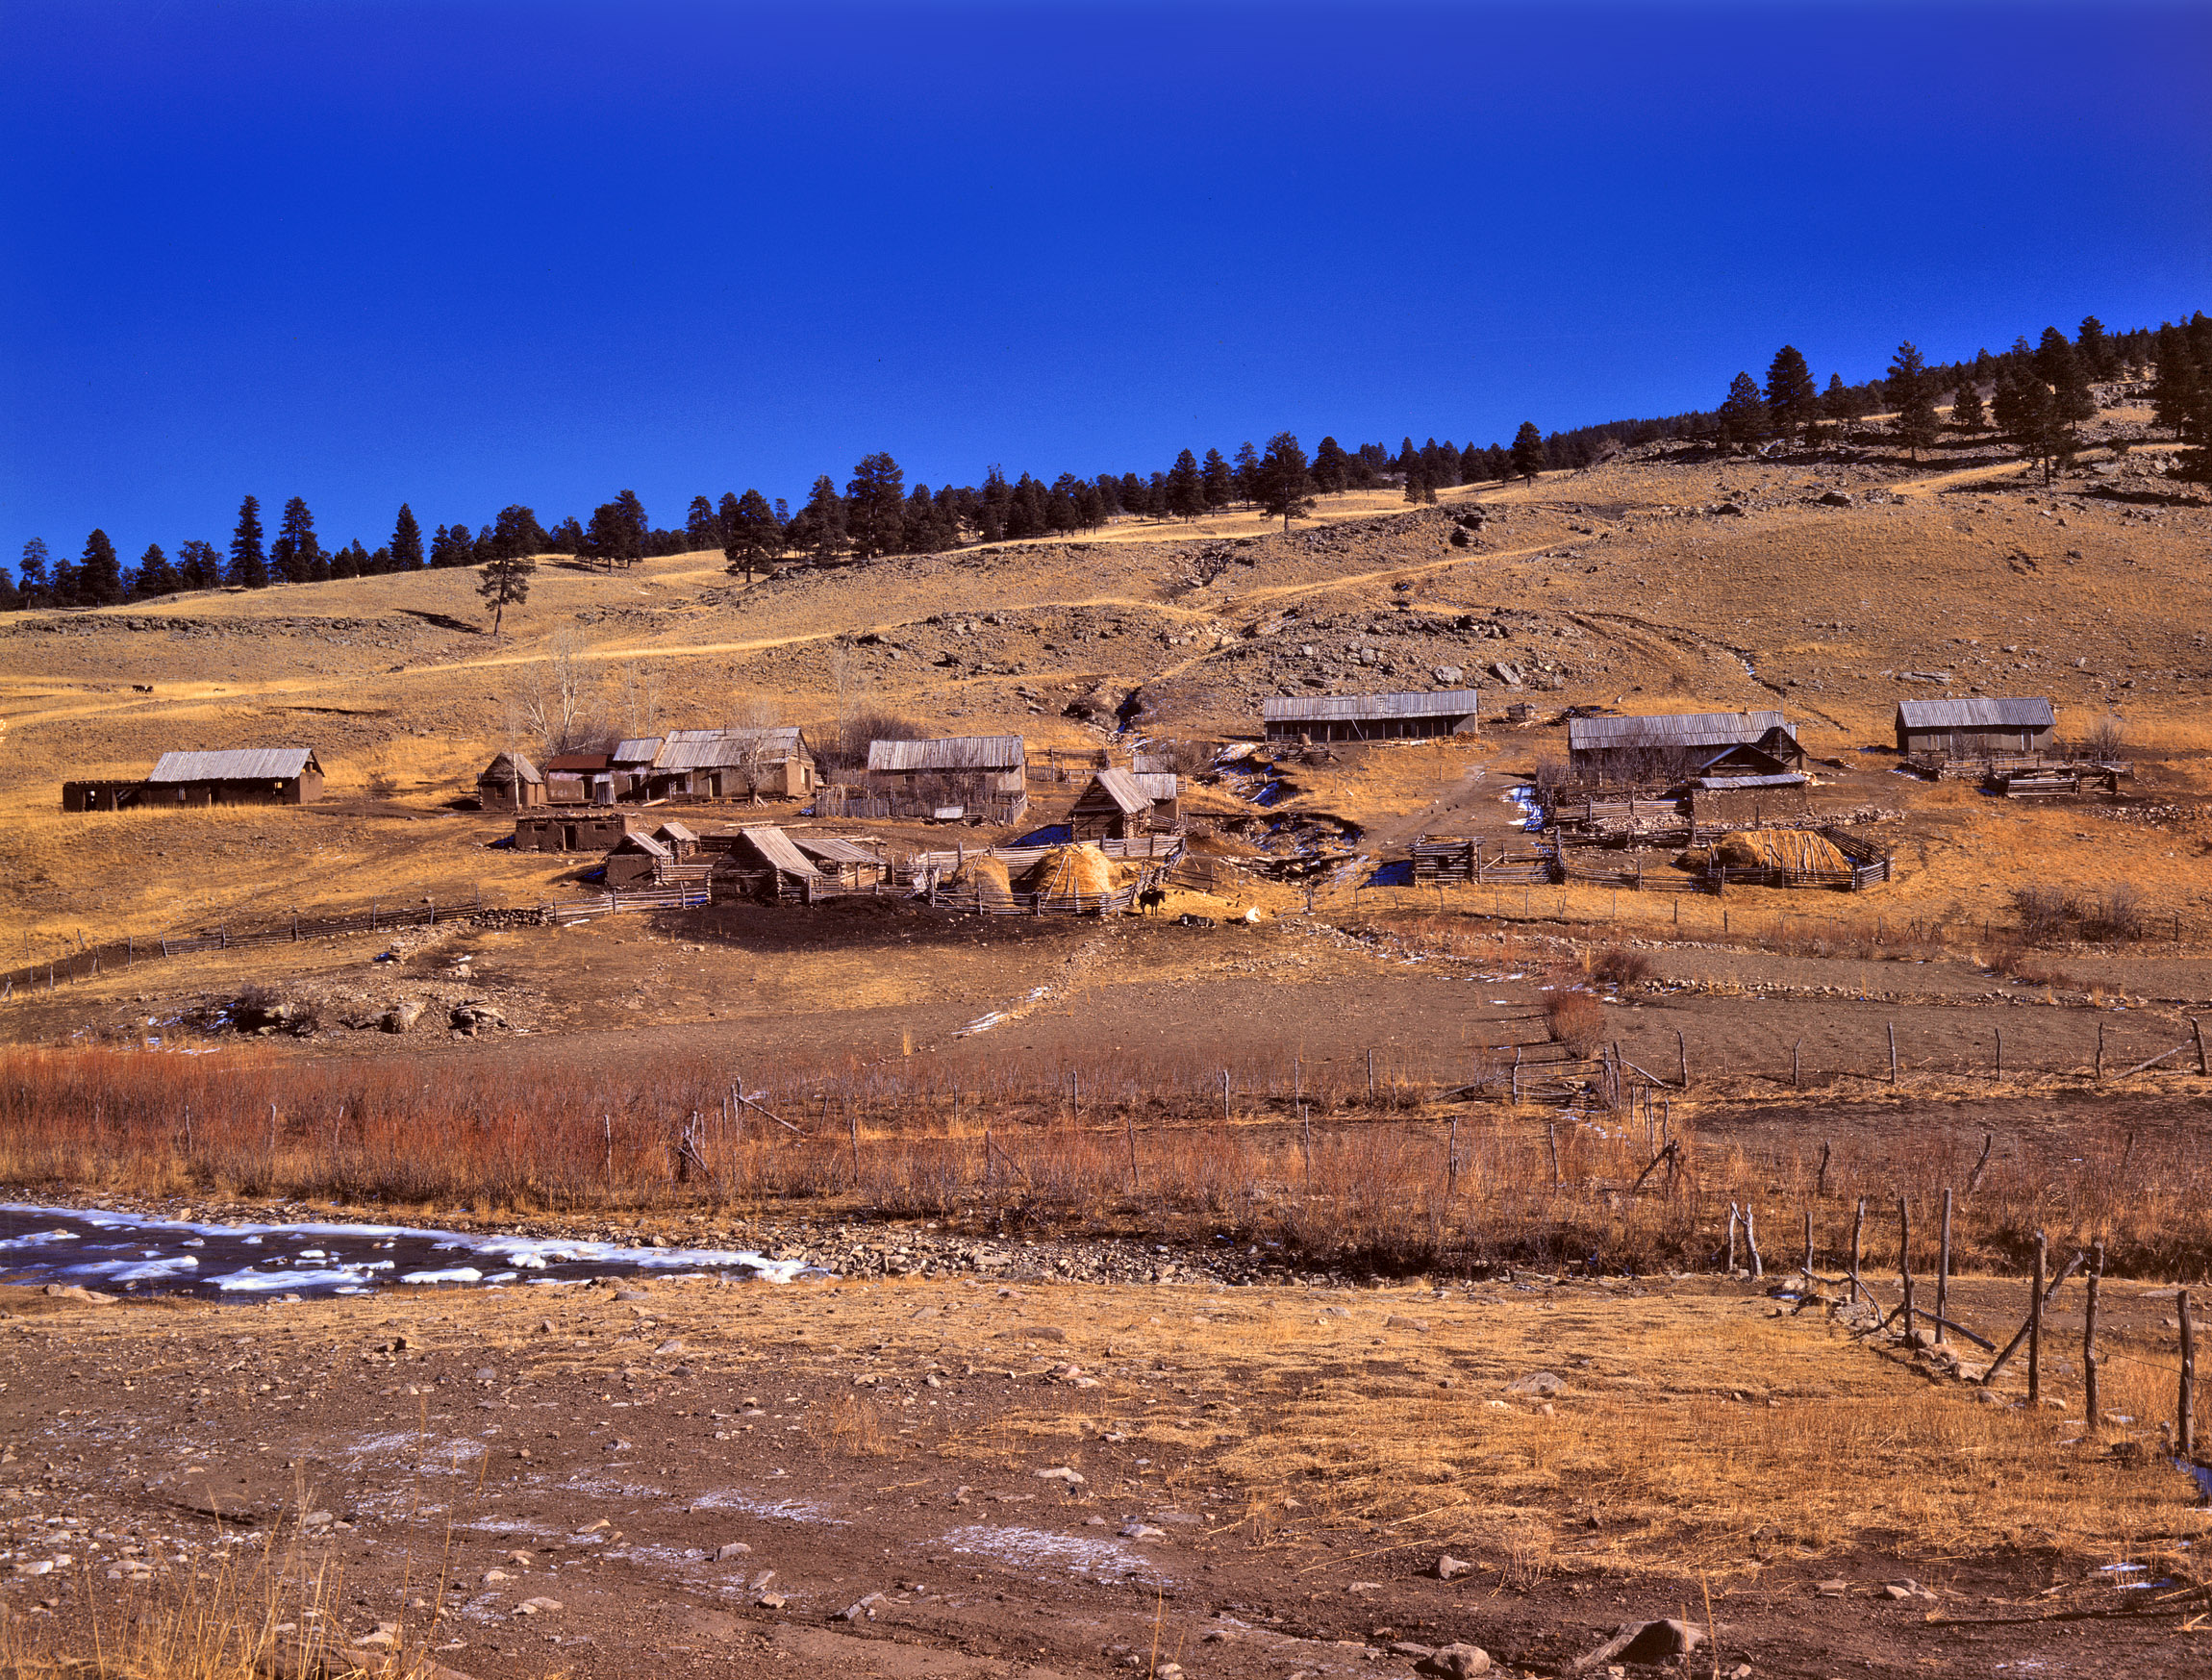 Spring 1943. "Romeroville, near Chacon, New Mexico." View full size. 4x5 Kodachrome transparency by John Collier for the Office of War Information.